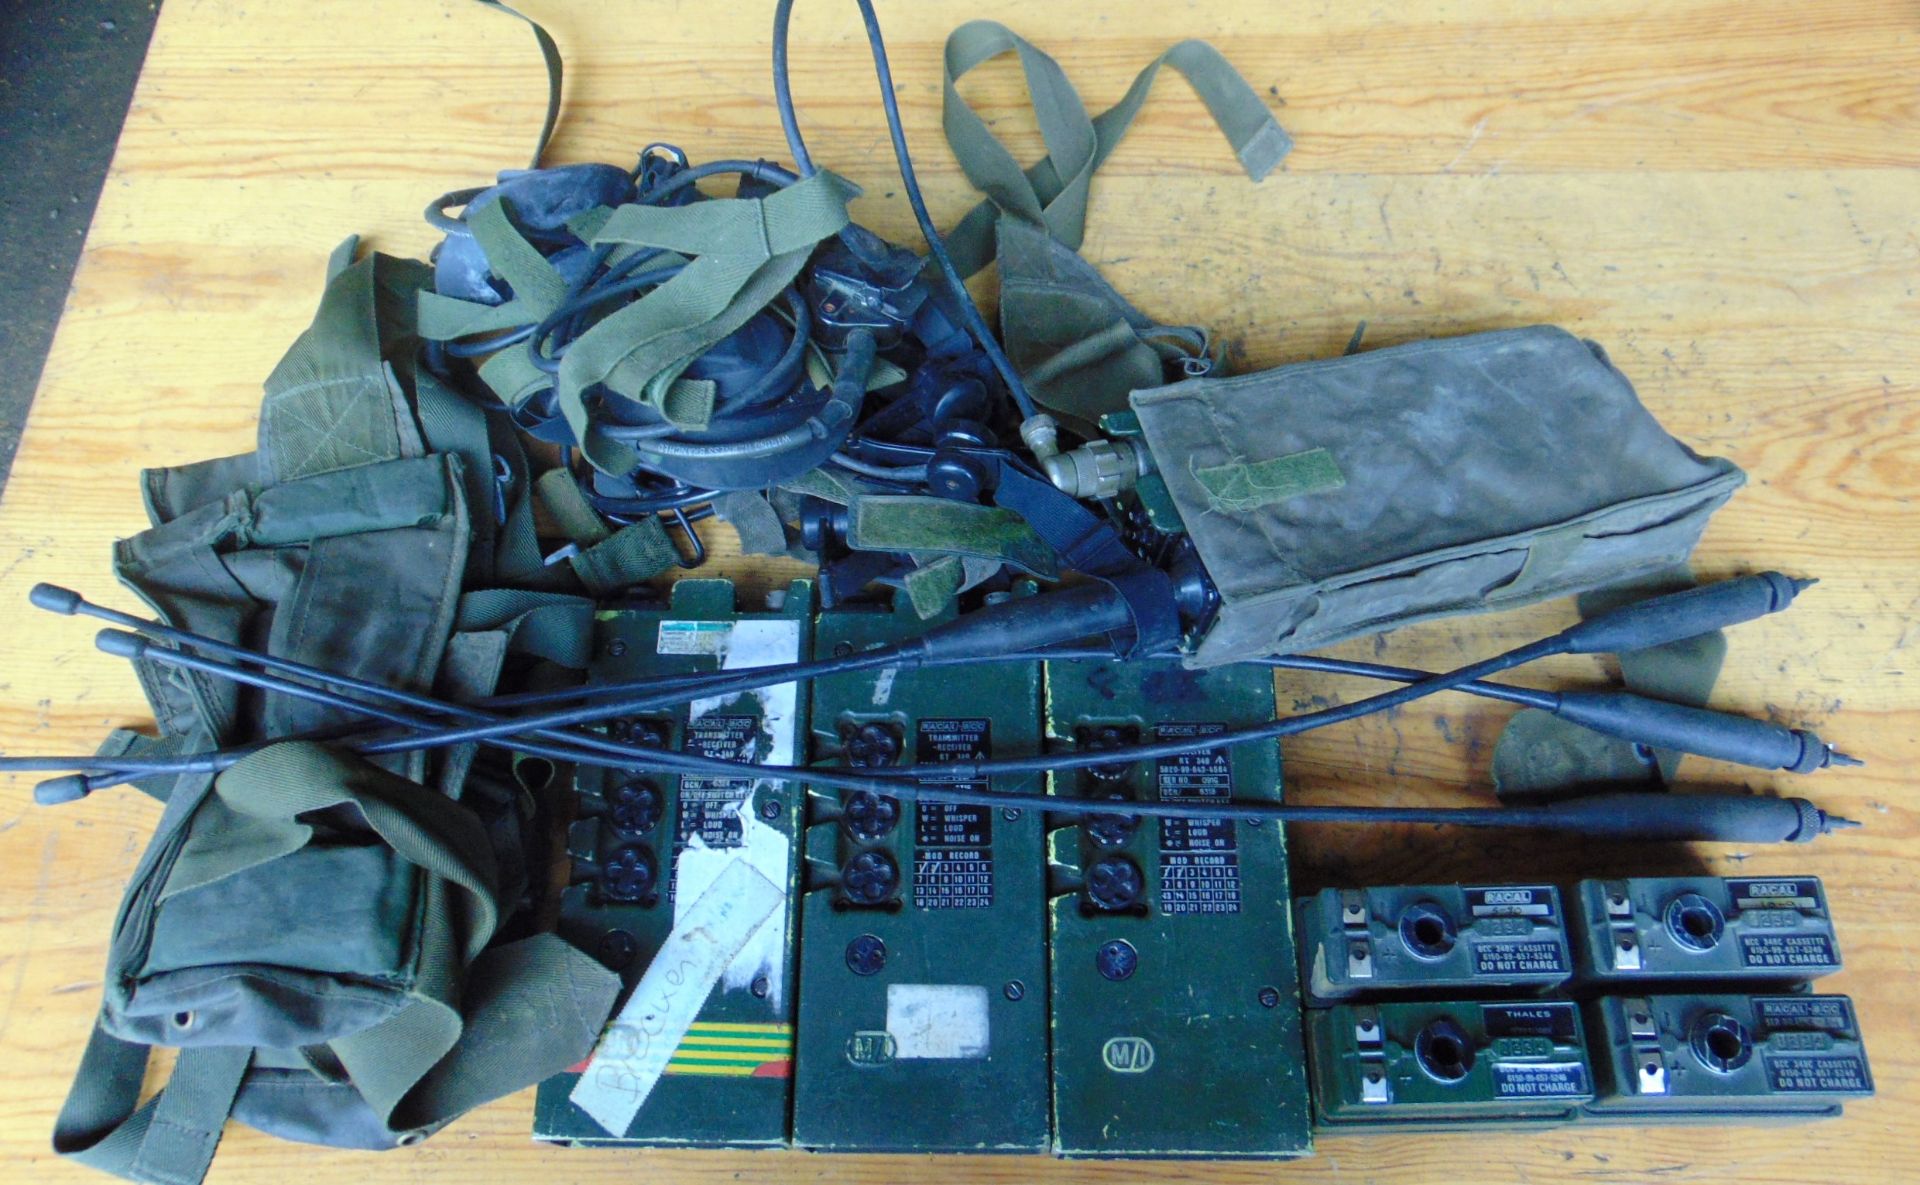 4 x UK / RT 349 Transmitter Receiver Complete as shown - Image 2 of 5